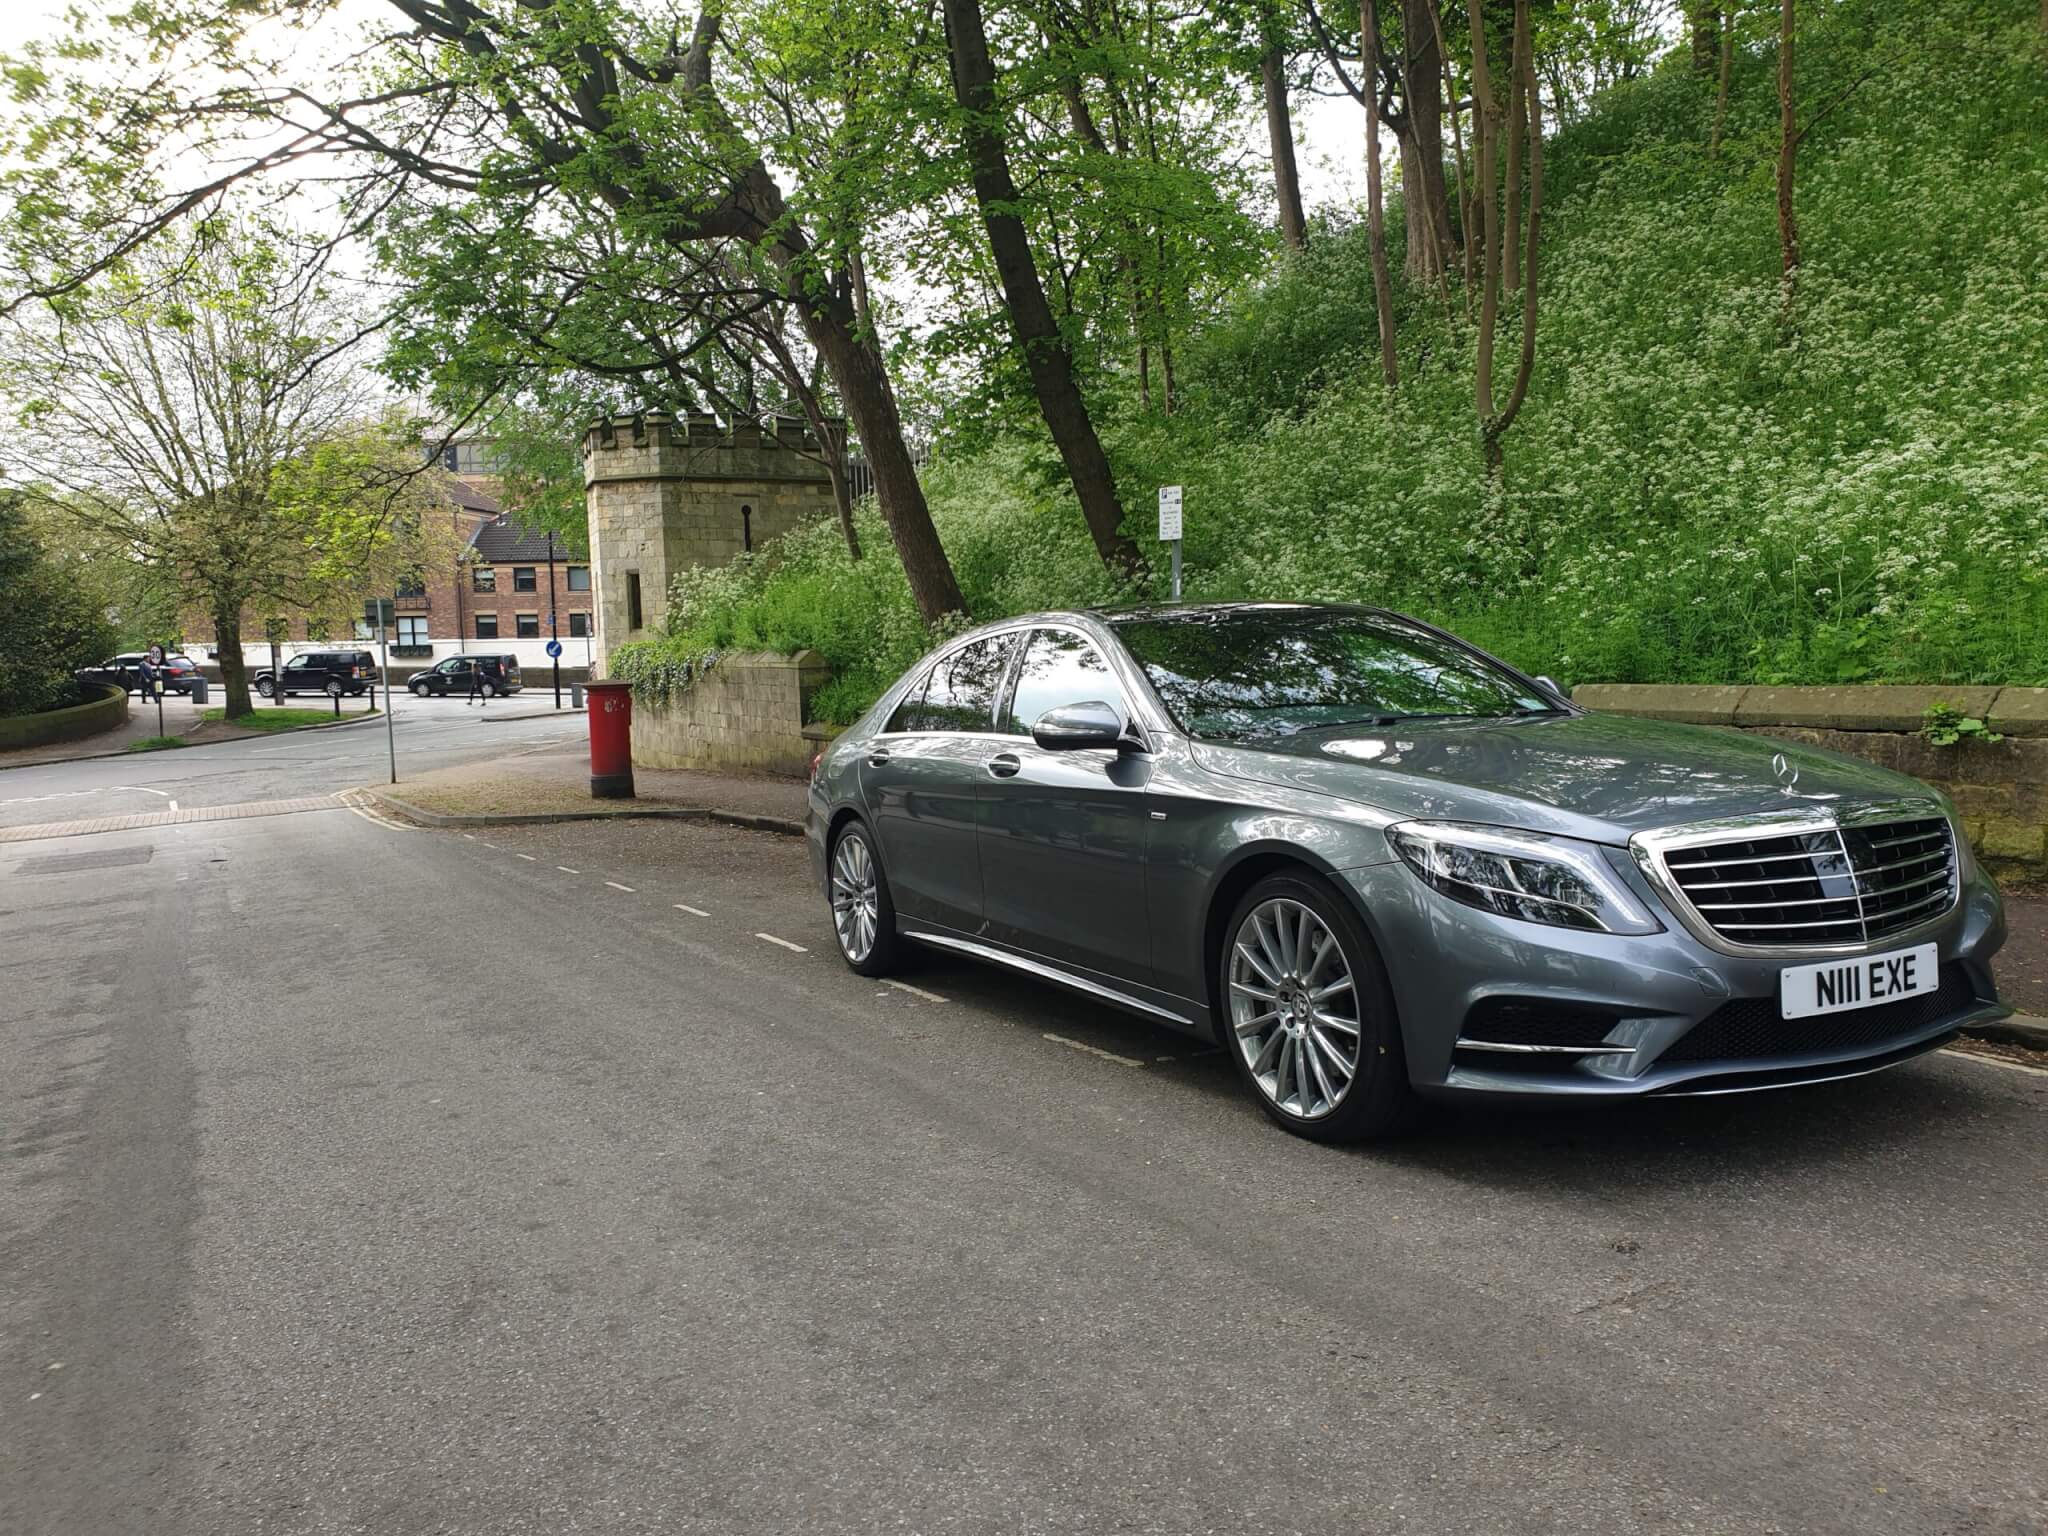 Our 2020 Mercedes s class.